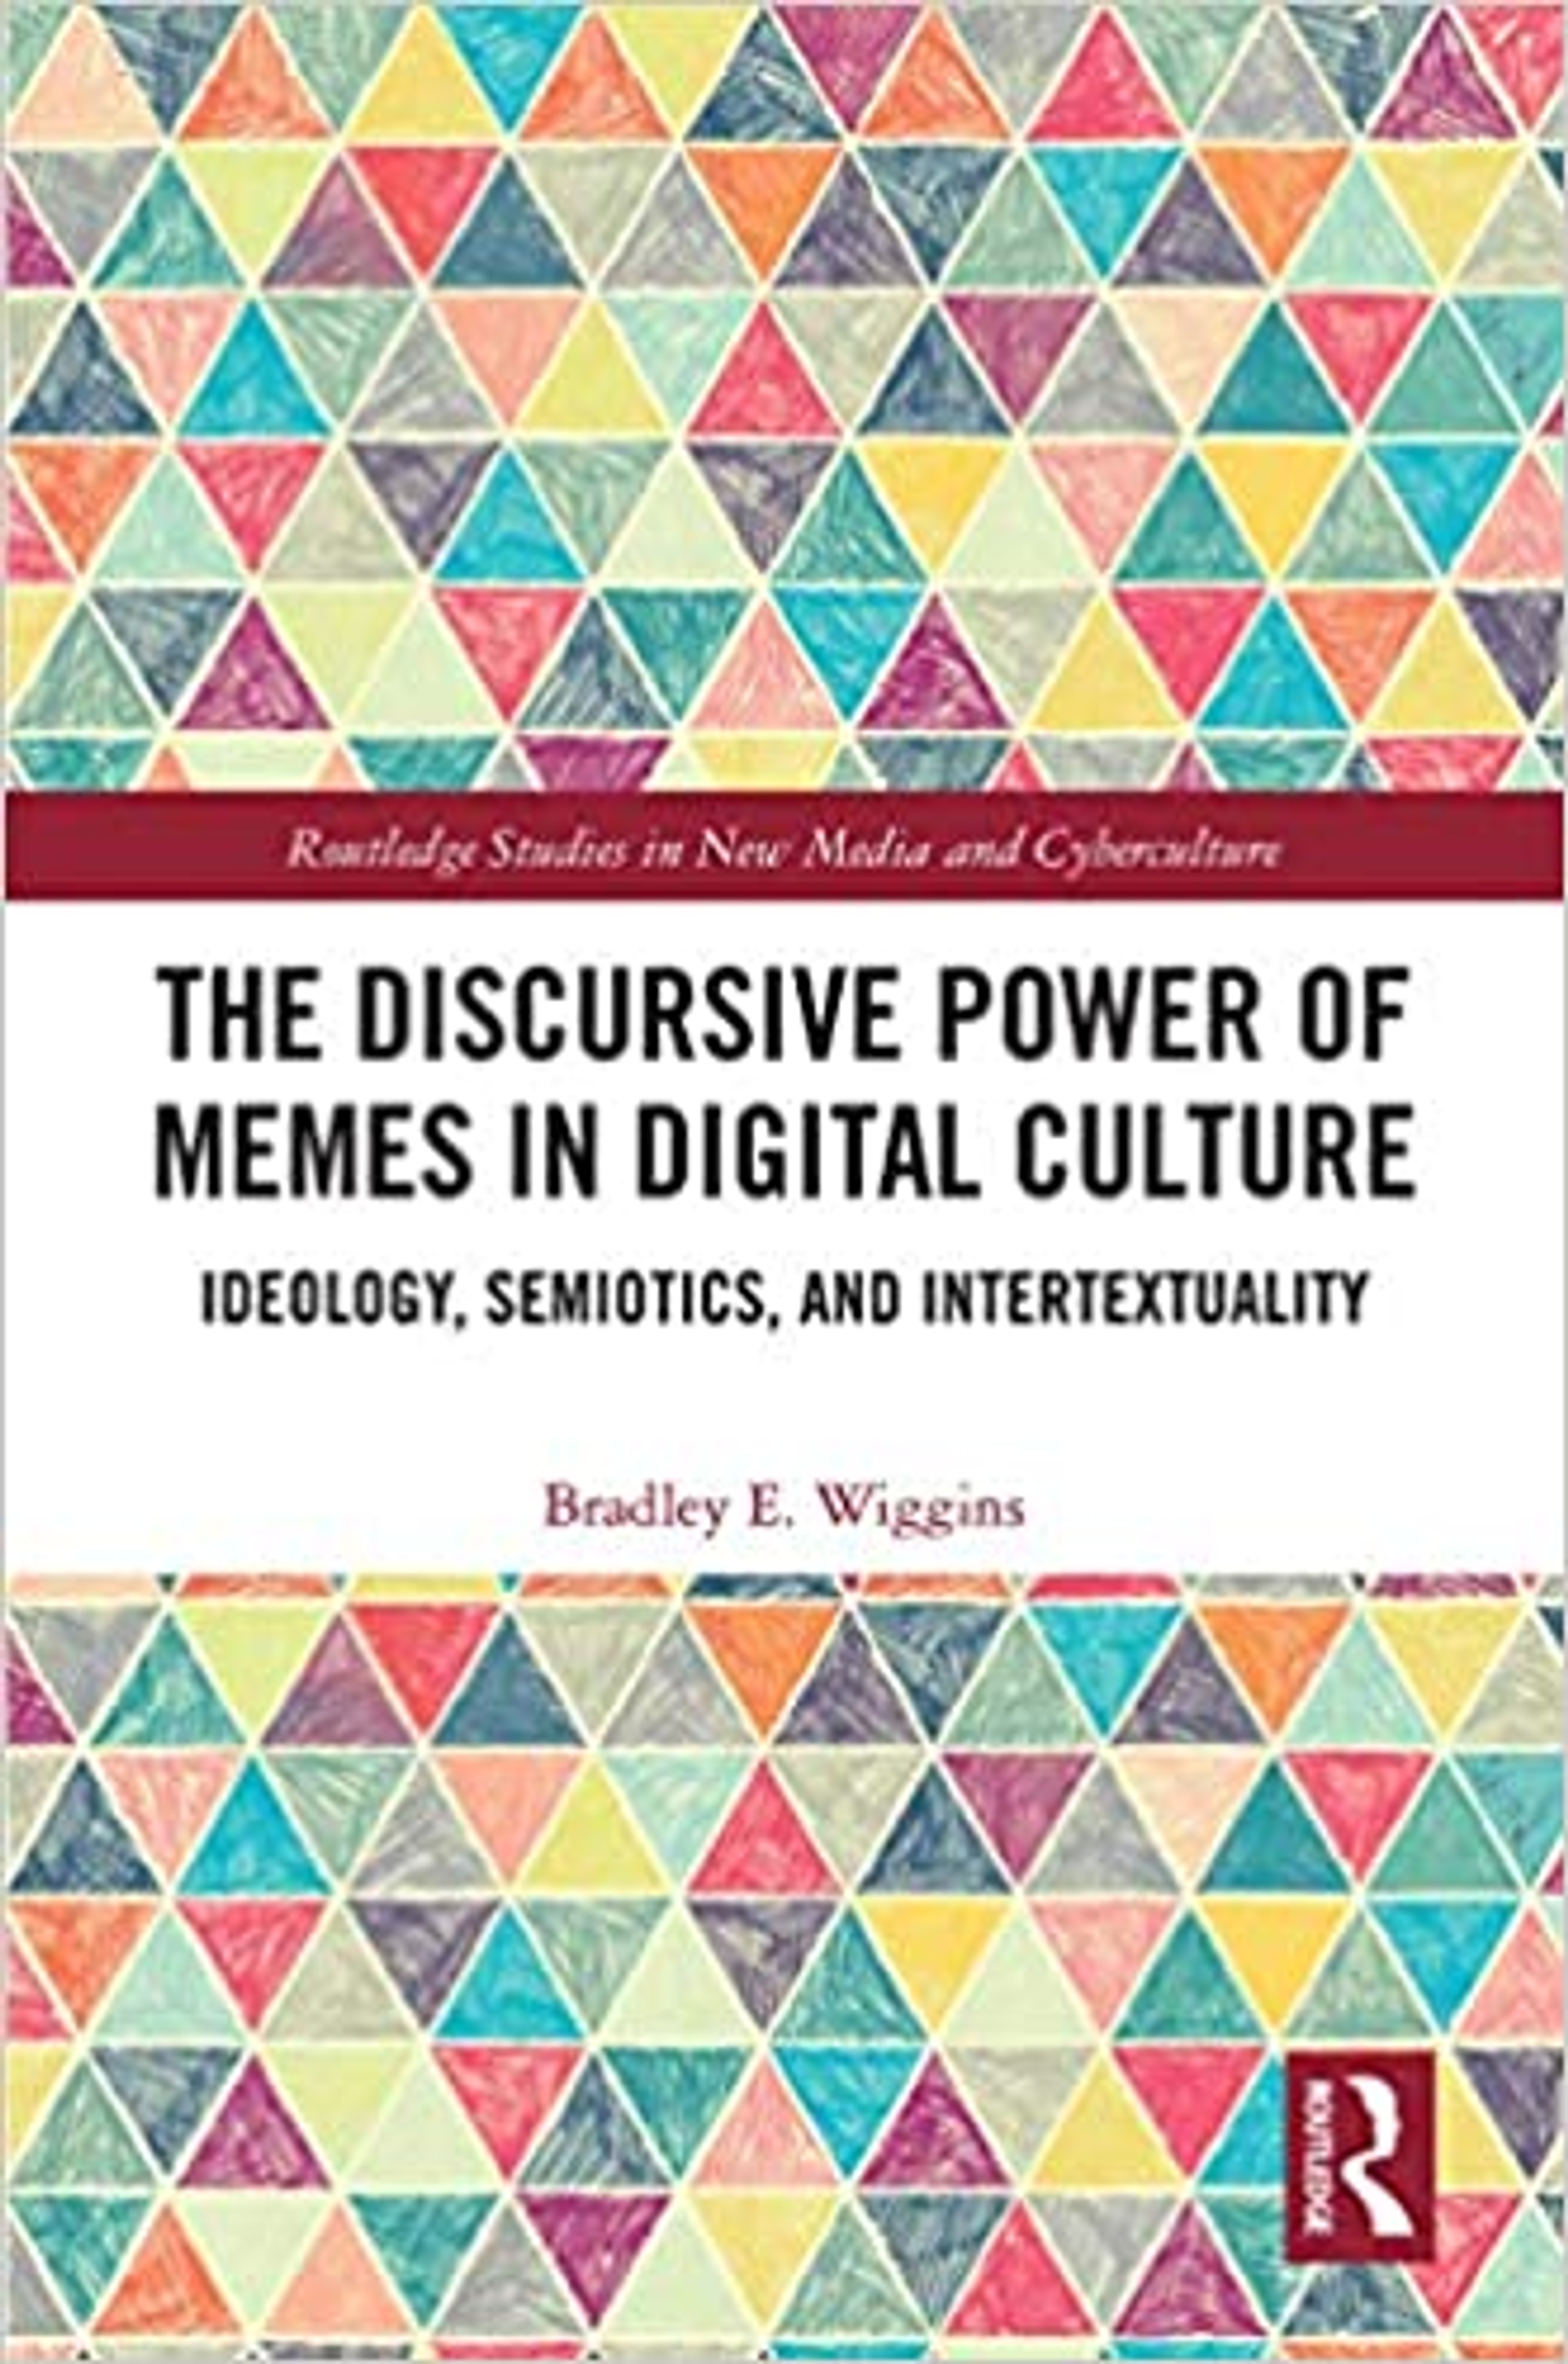 Book Summary & Highlights: The Discursive Power Of Memes In Digital Culture By Bradley Wiggins